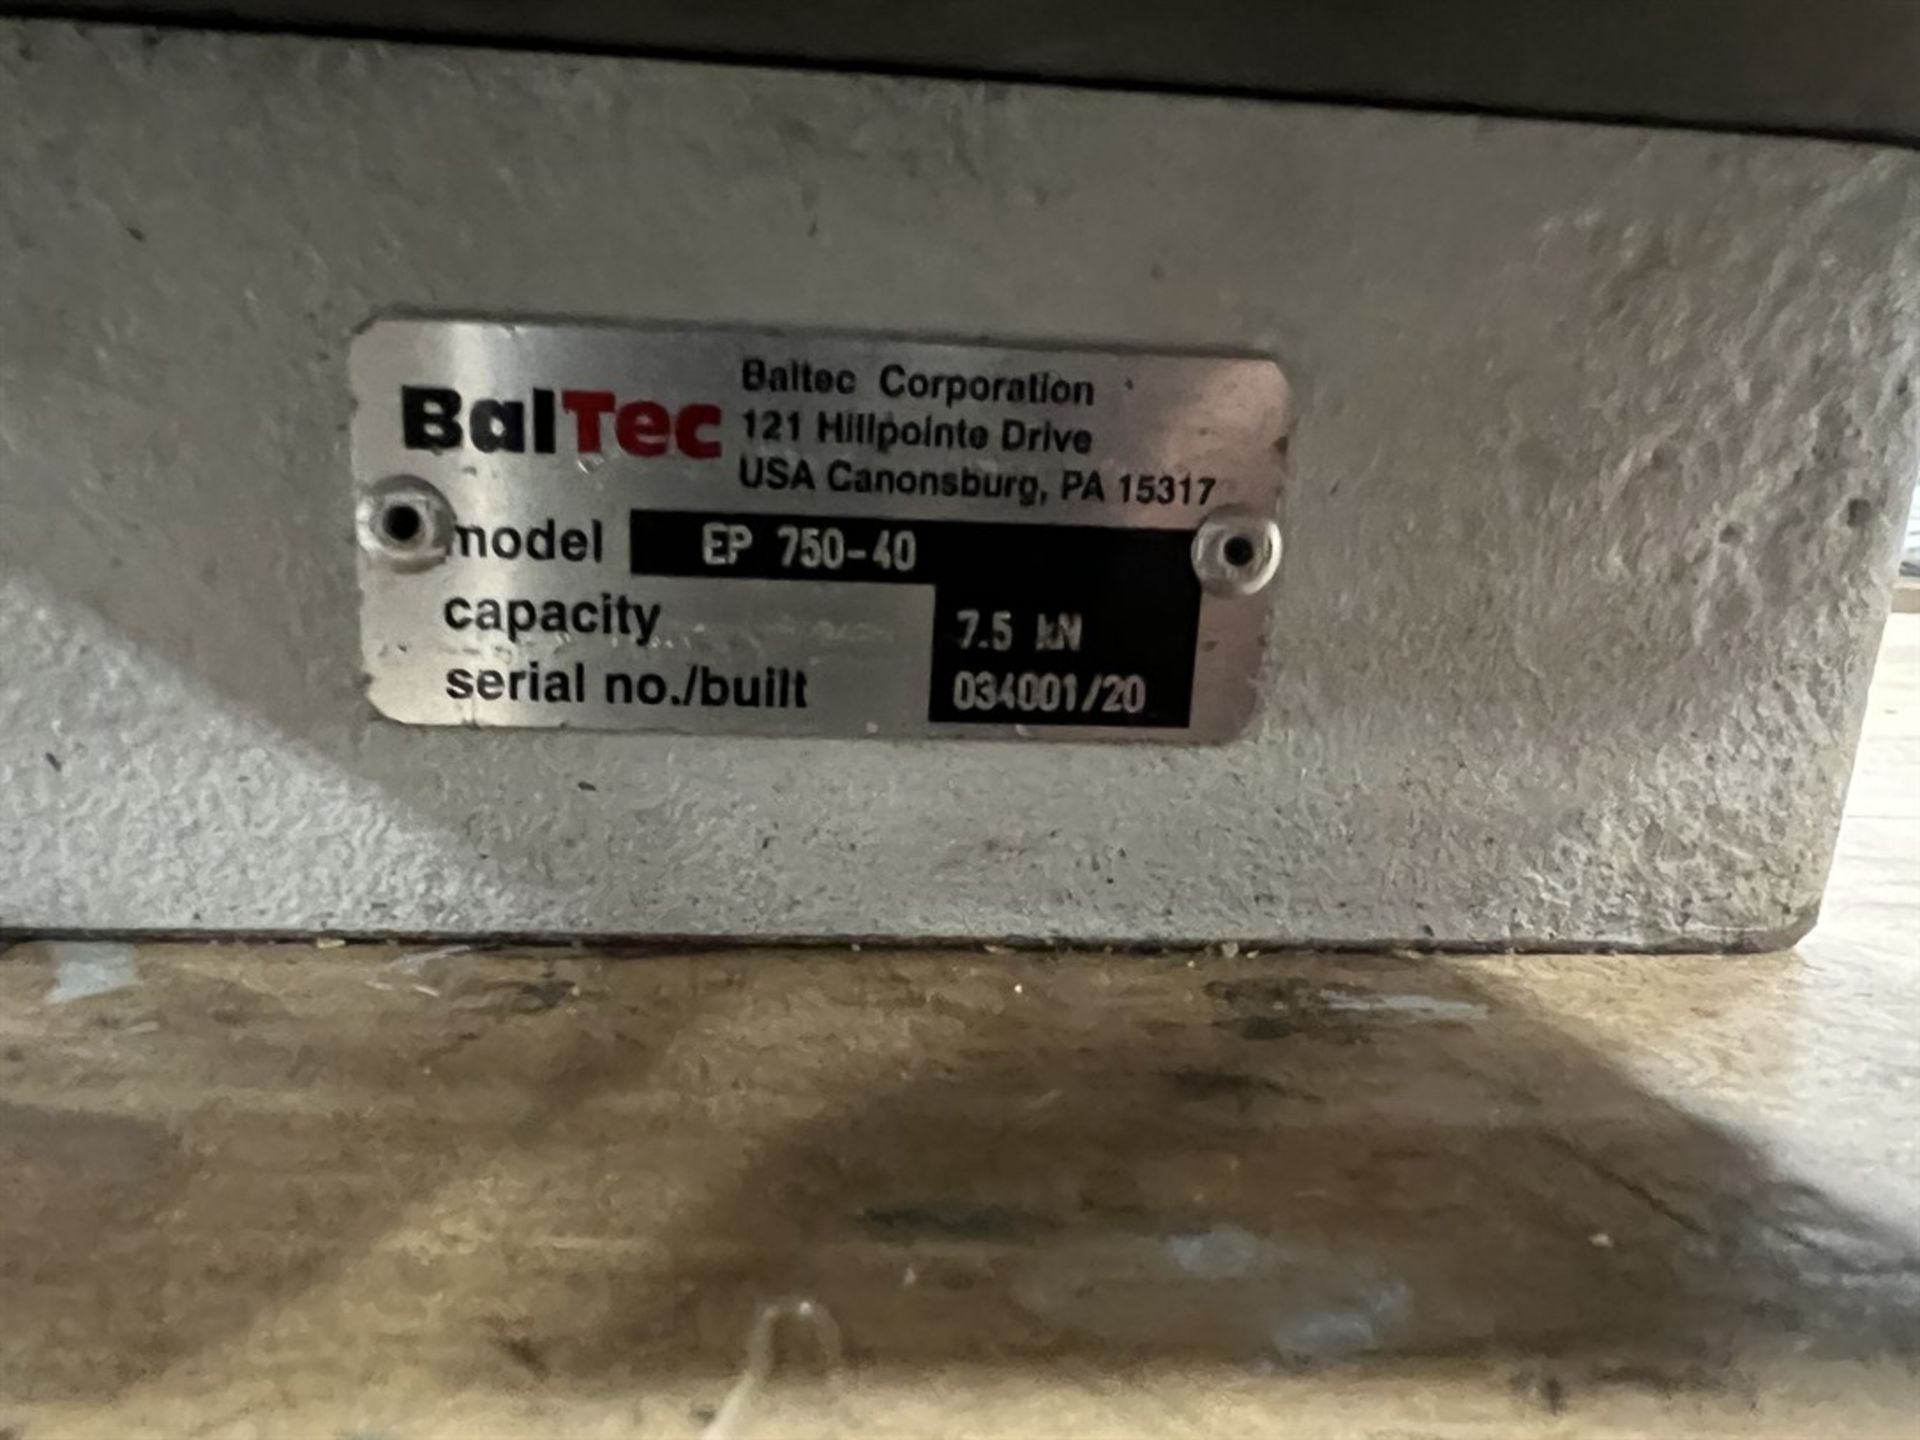 BALTEC EP 750-40 Pneumatic Toggle Press, s/n 034001/20 - Image 5 of 5